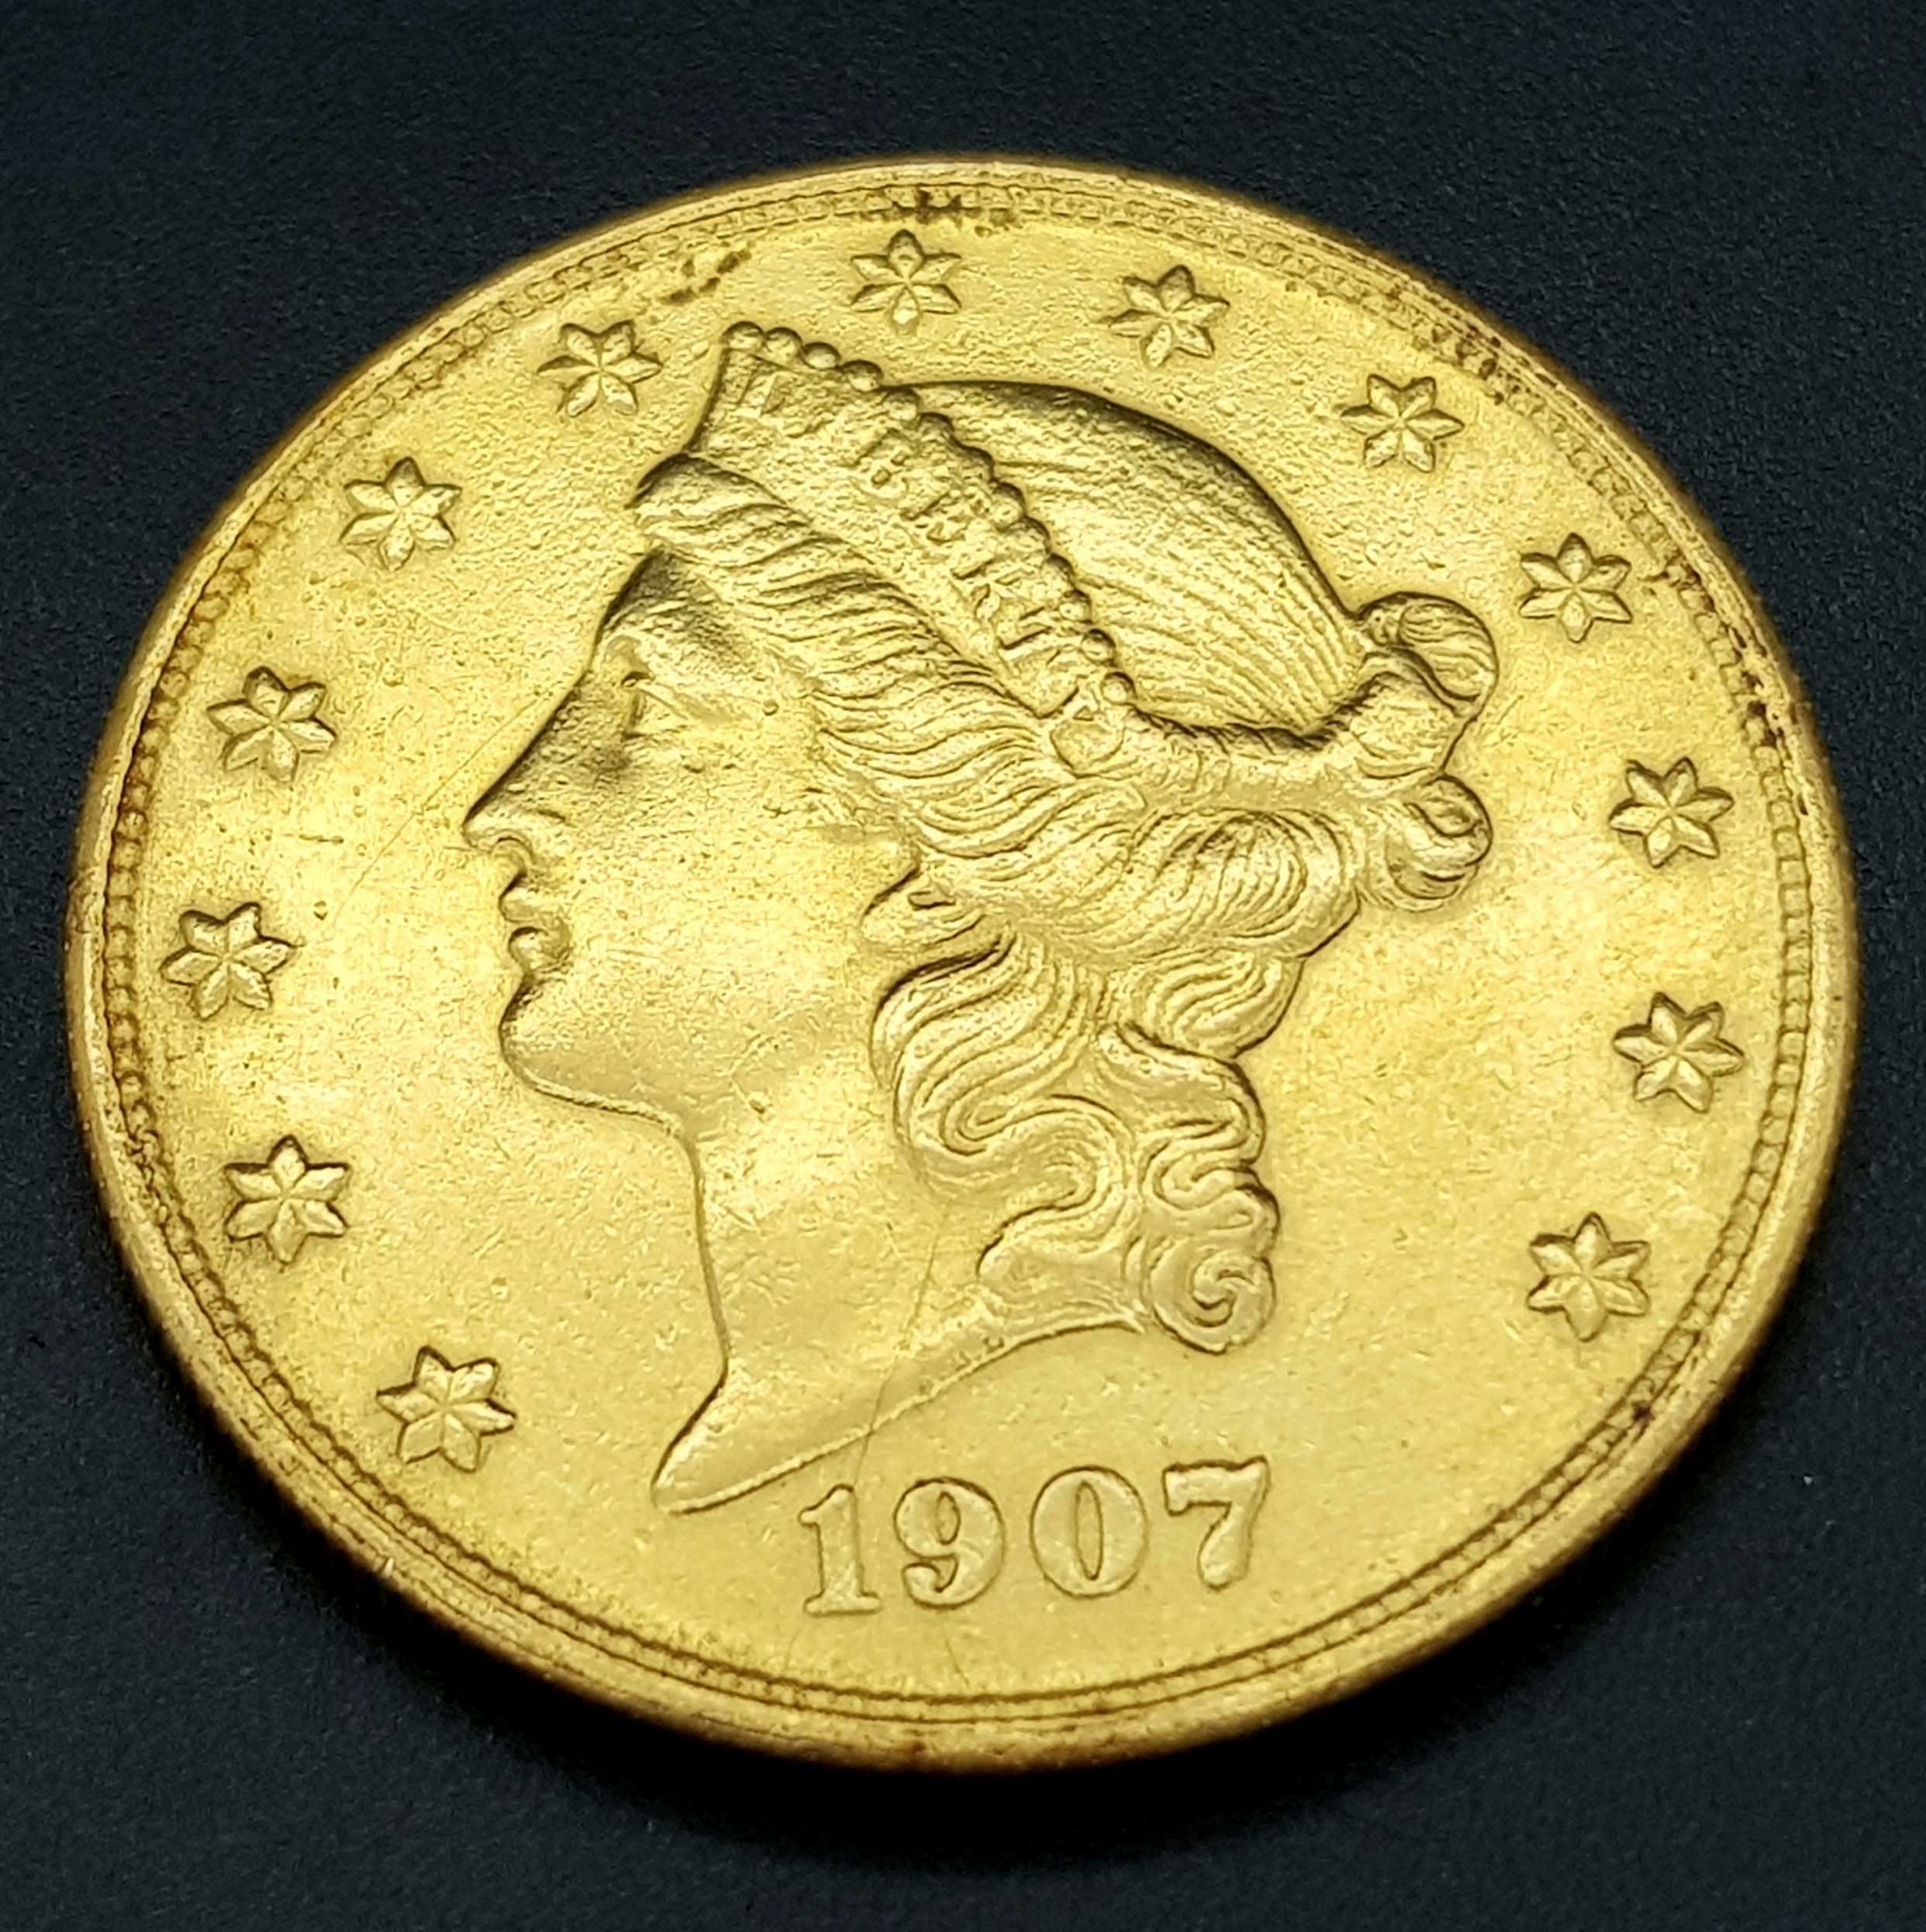 A $20 GOLD LIBERTY COIN DATED 1907 AND WEIGHING 33.43gms THIS COIN IS IN VERY GOOD CONDITION - Image 8 of 8